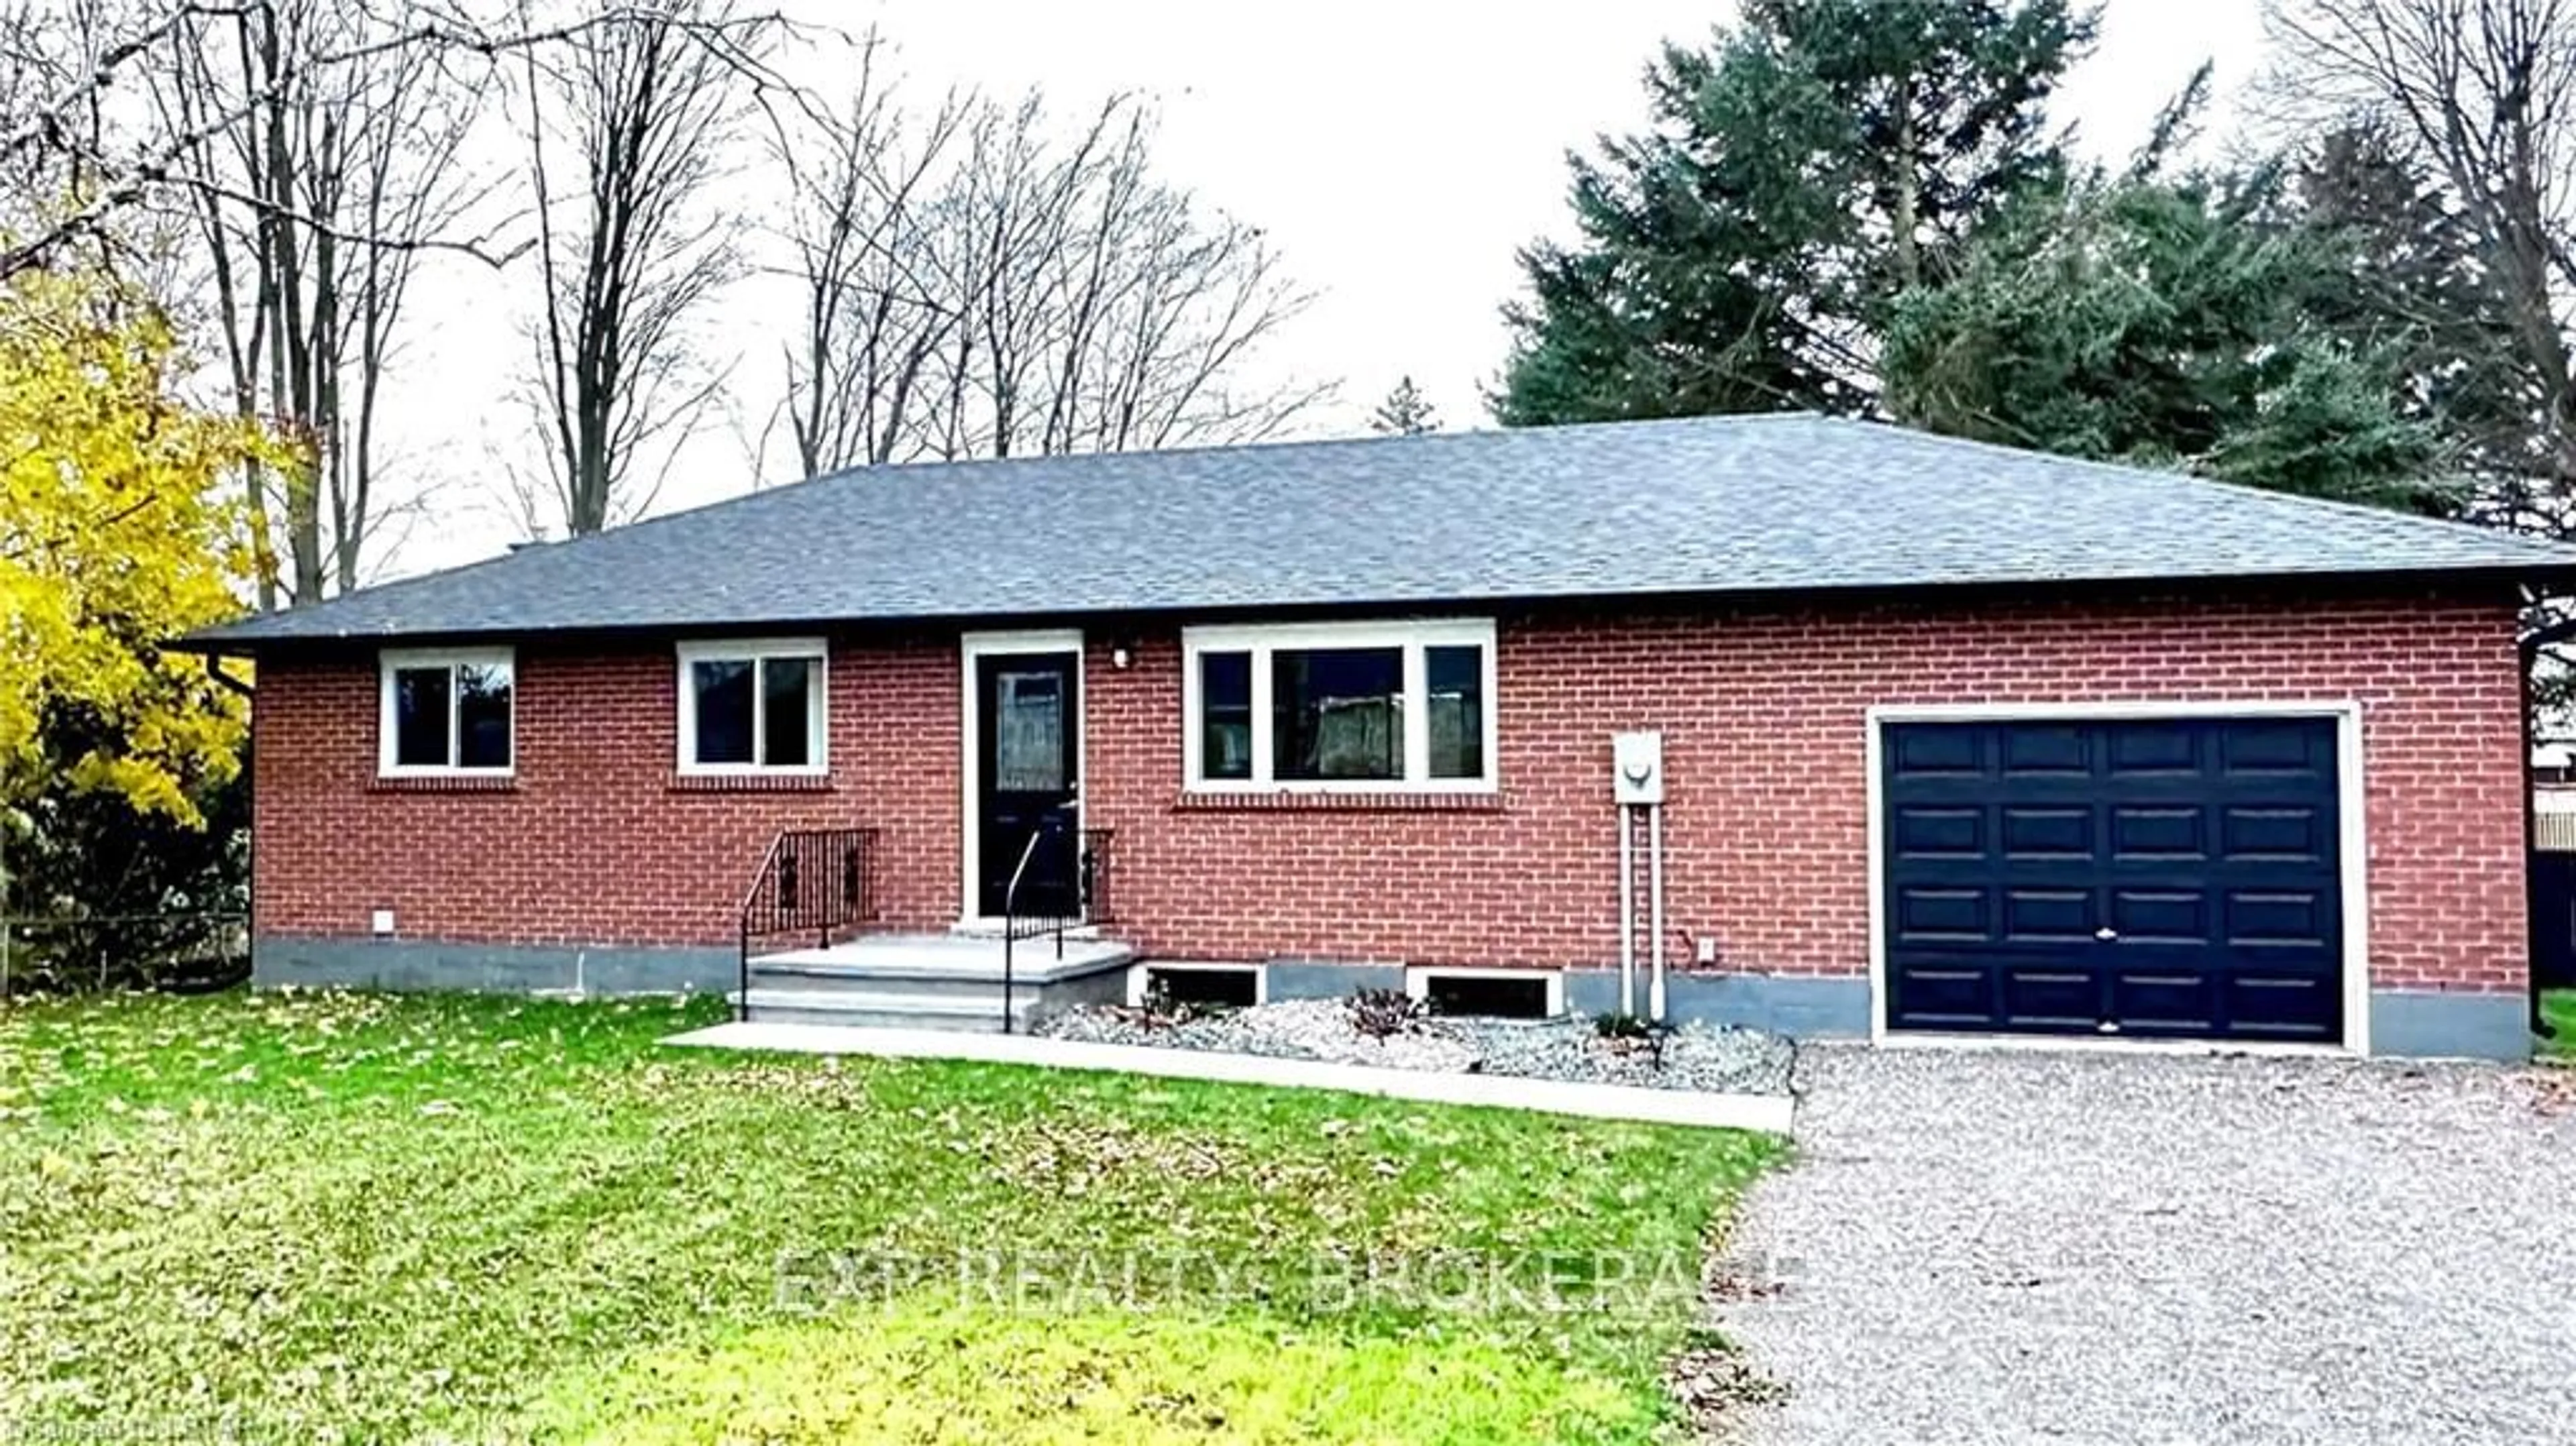 Home with brick exterior material for 24571 Saxton Rd, Strathroy-Caradoc Ontario N7G 3H4